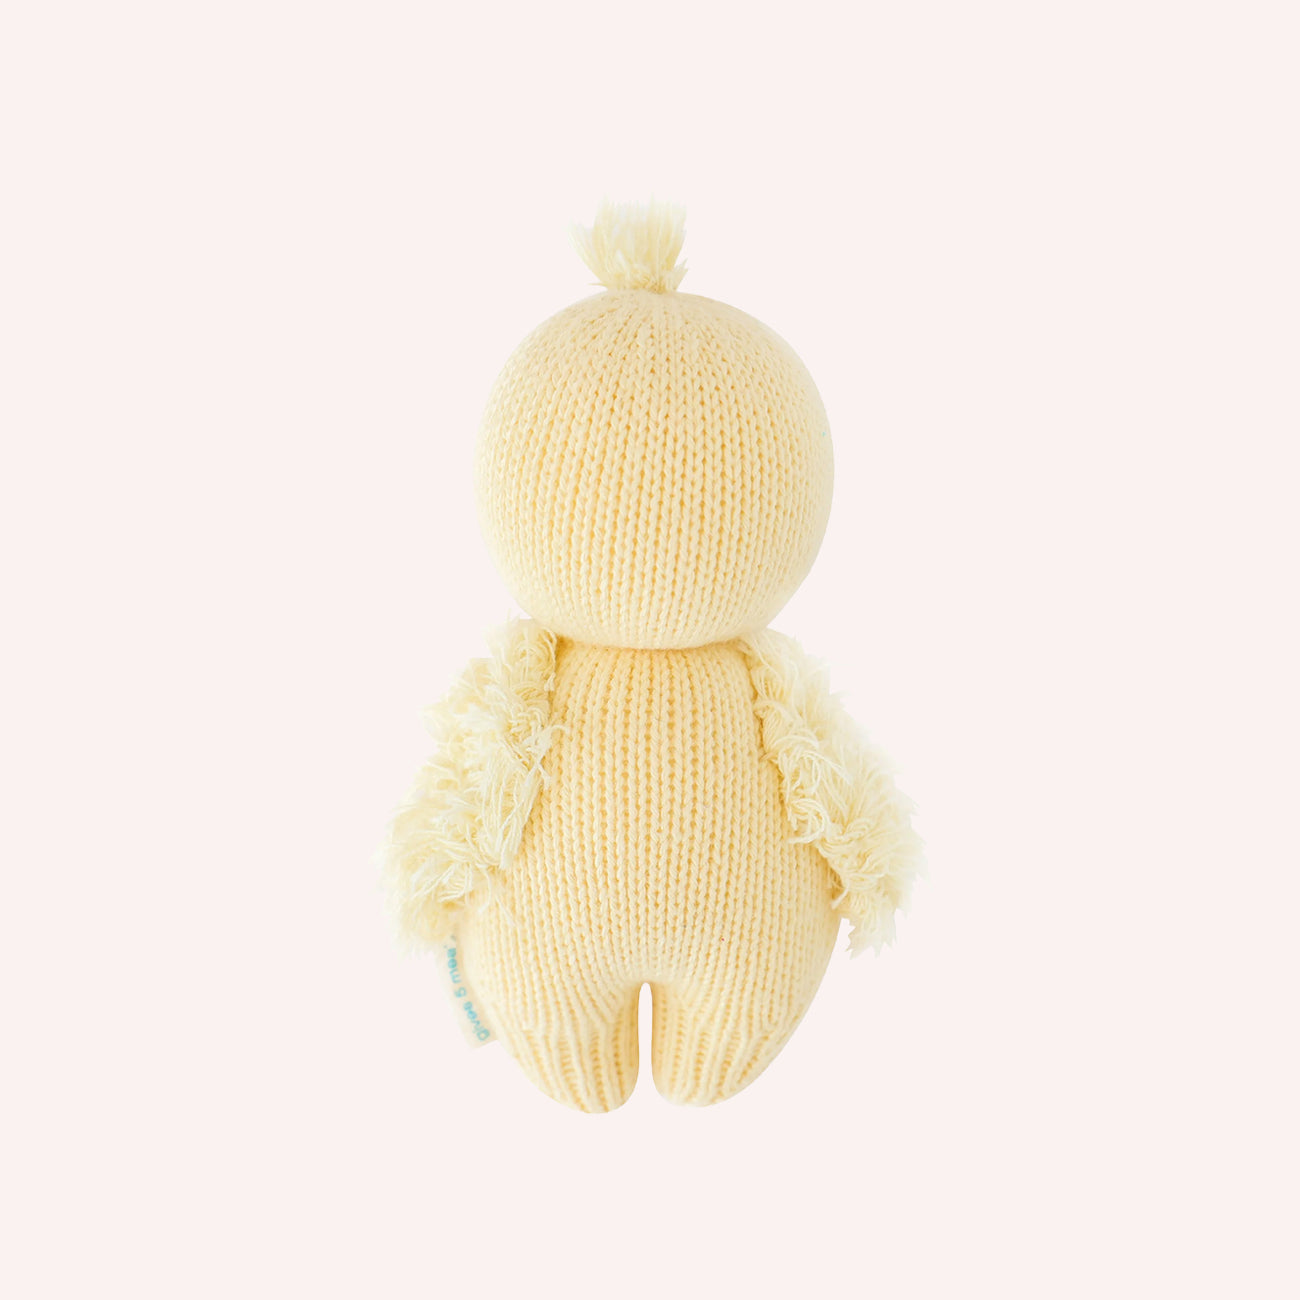 Hand Knitted Animal - Baby Duckling